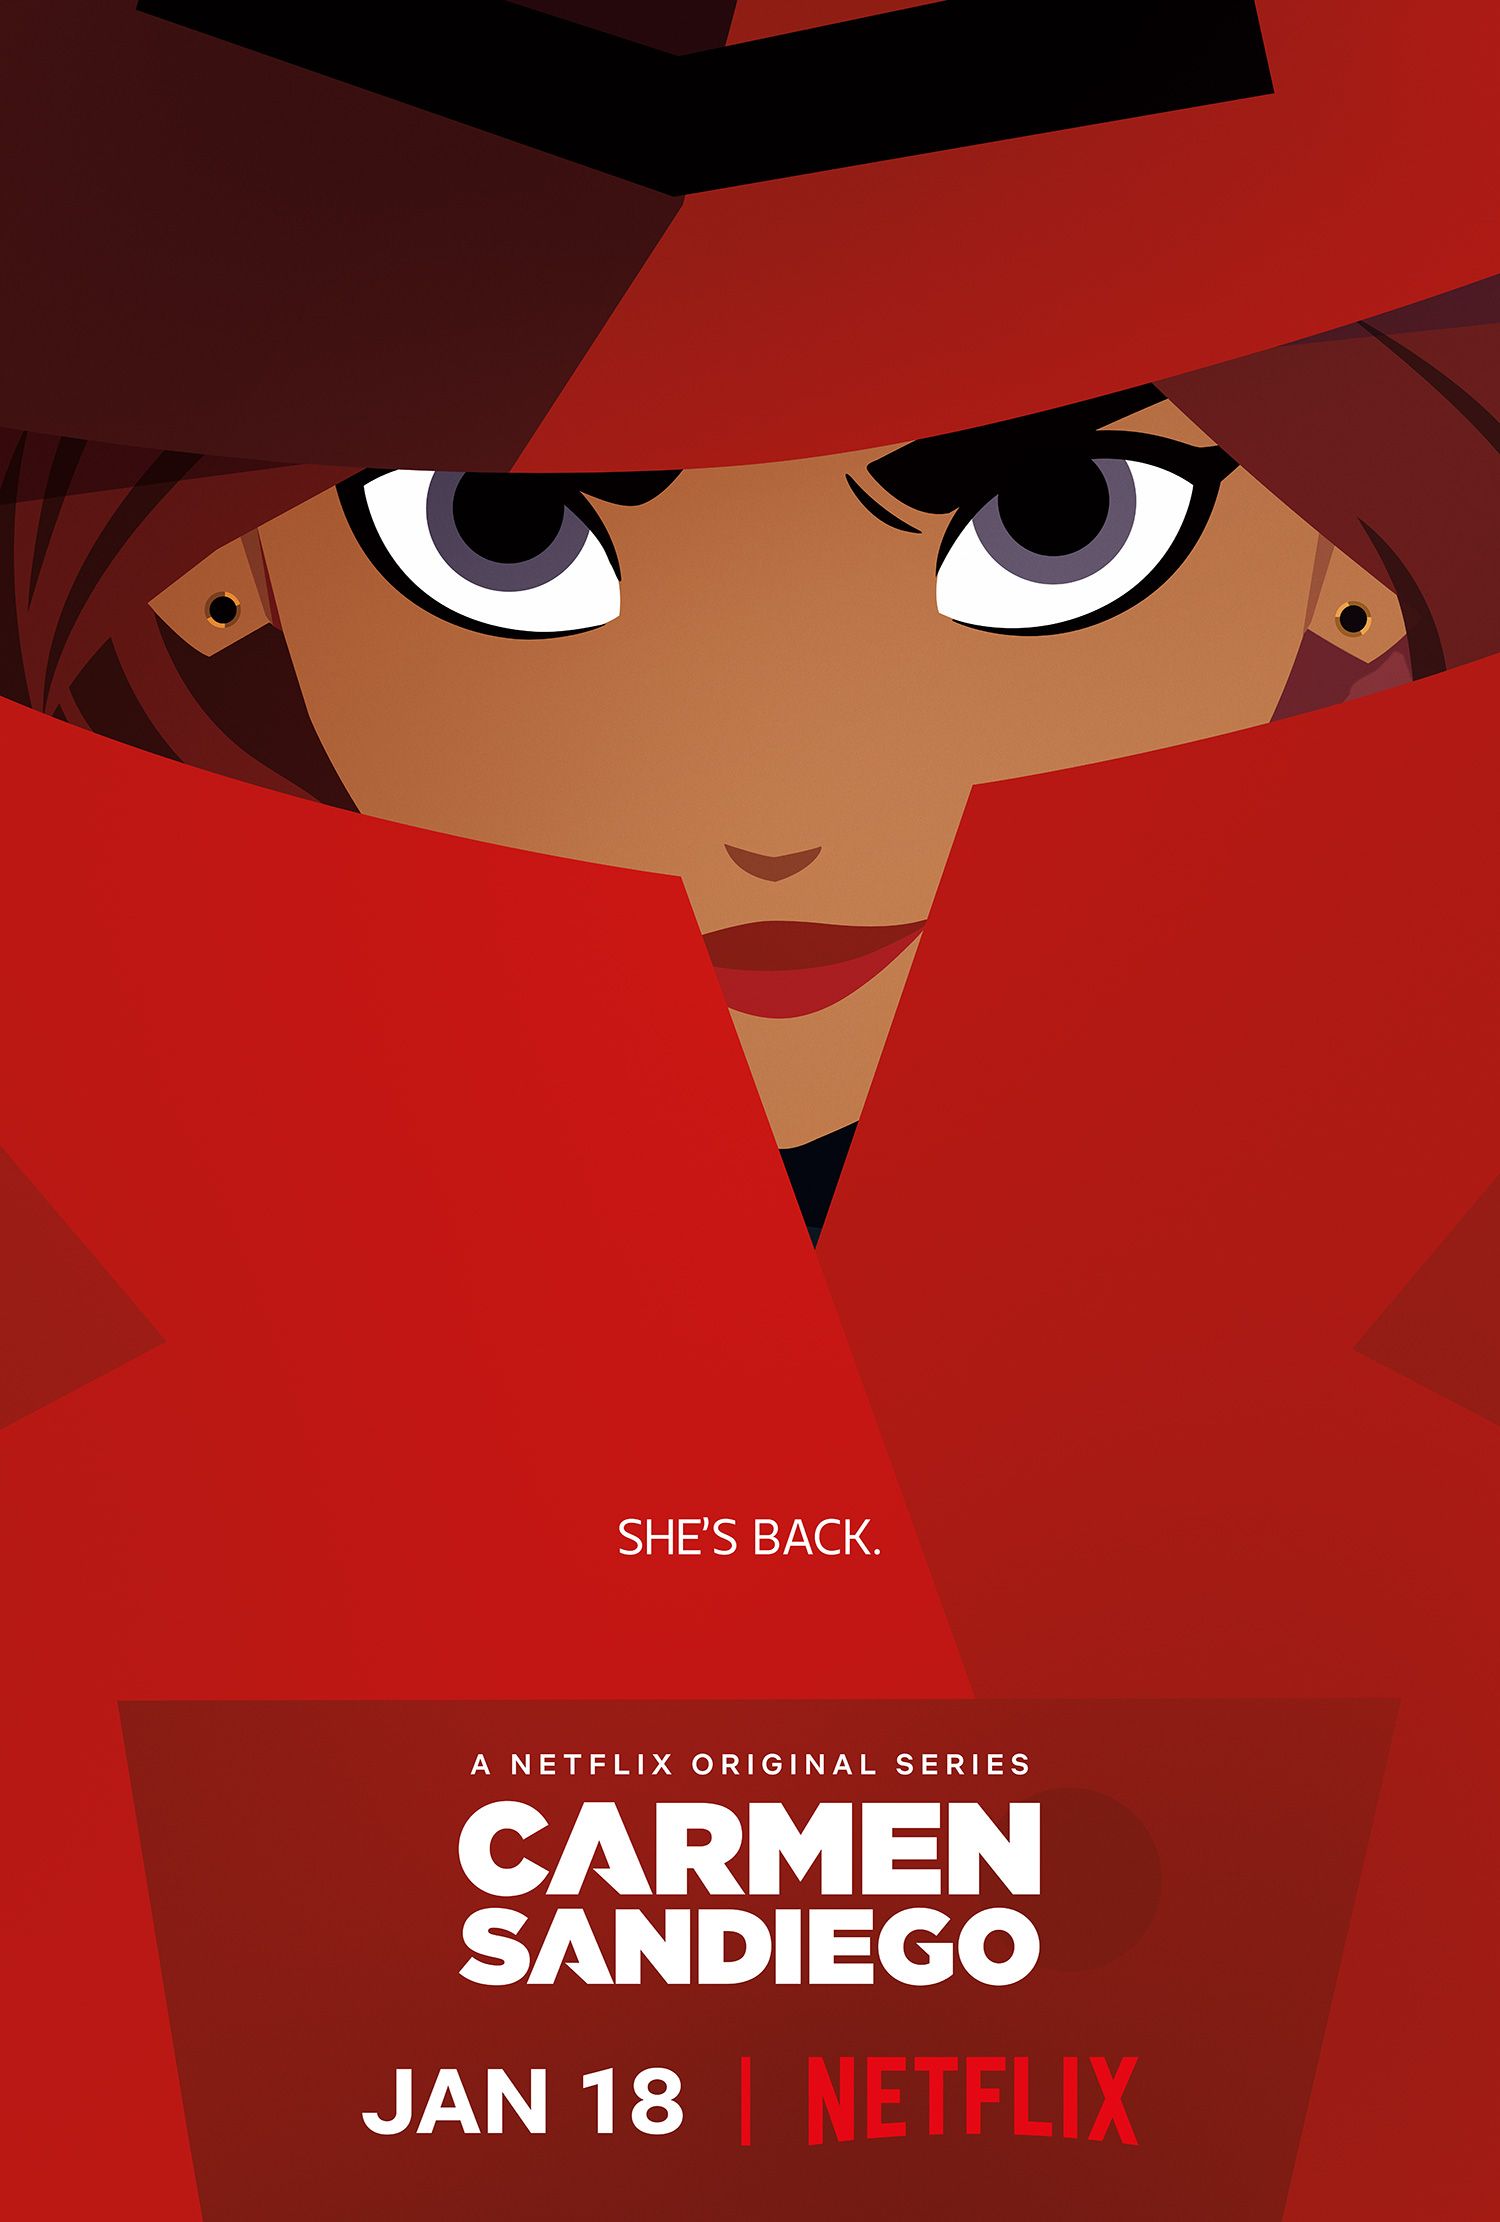 Carmen Sandiego Review: Fashion over Facts in the New Netflix